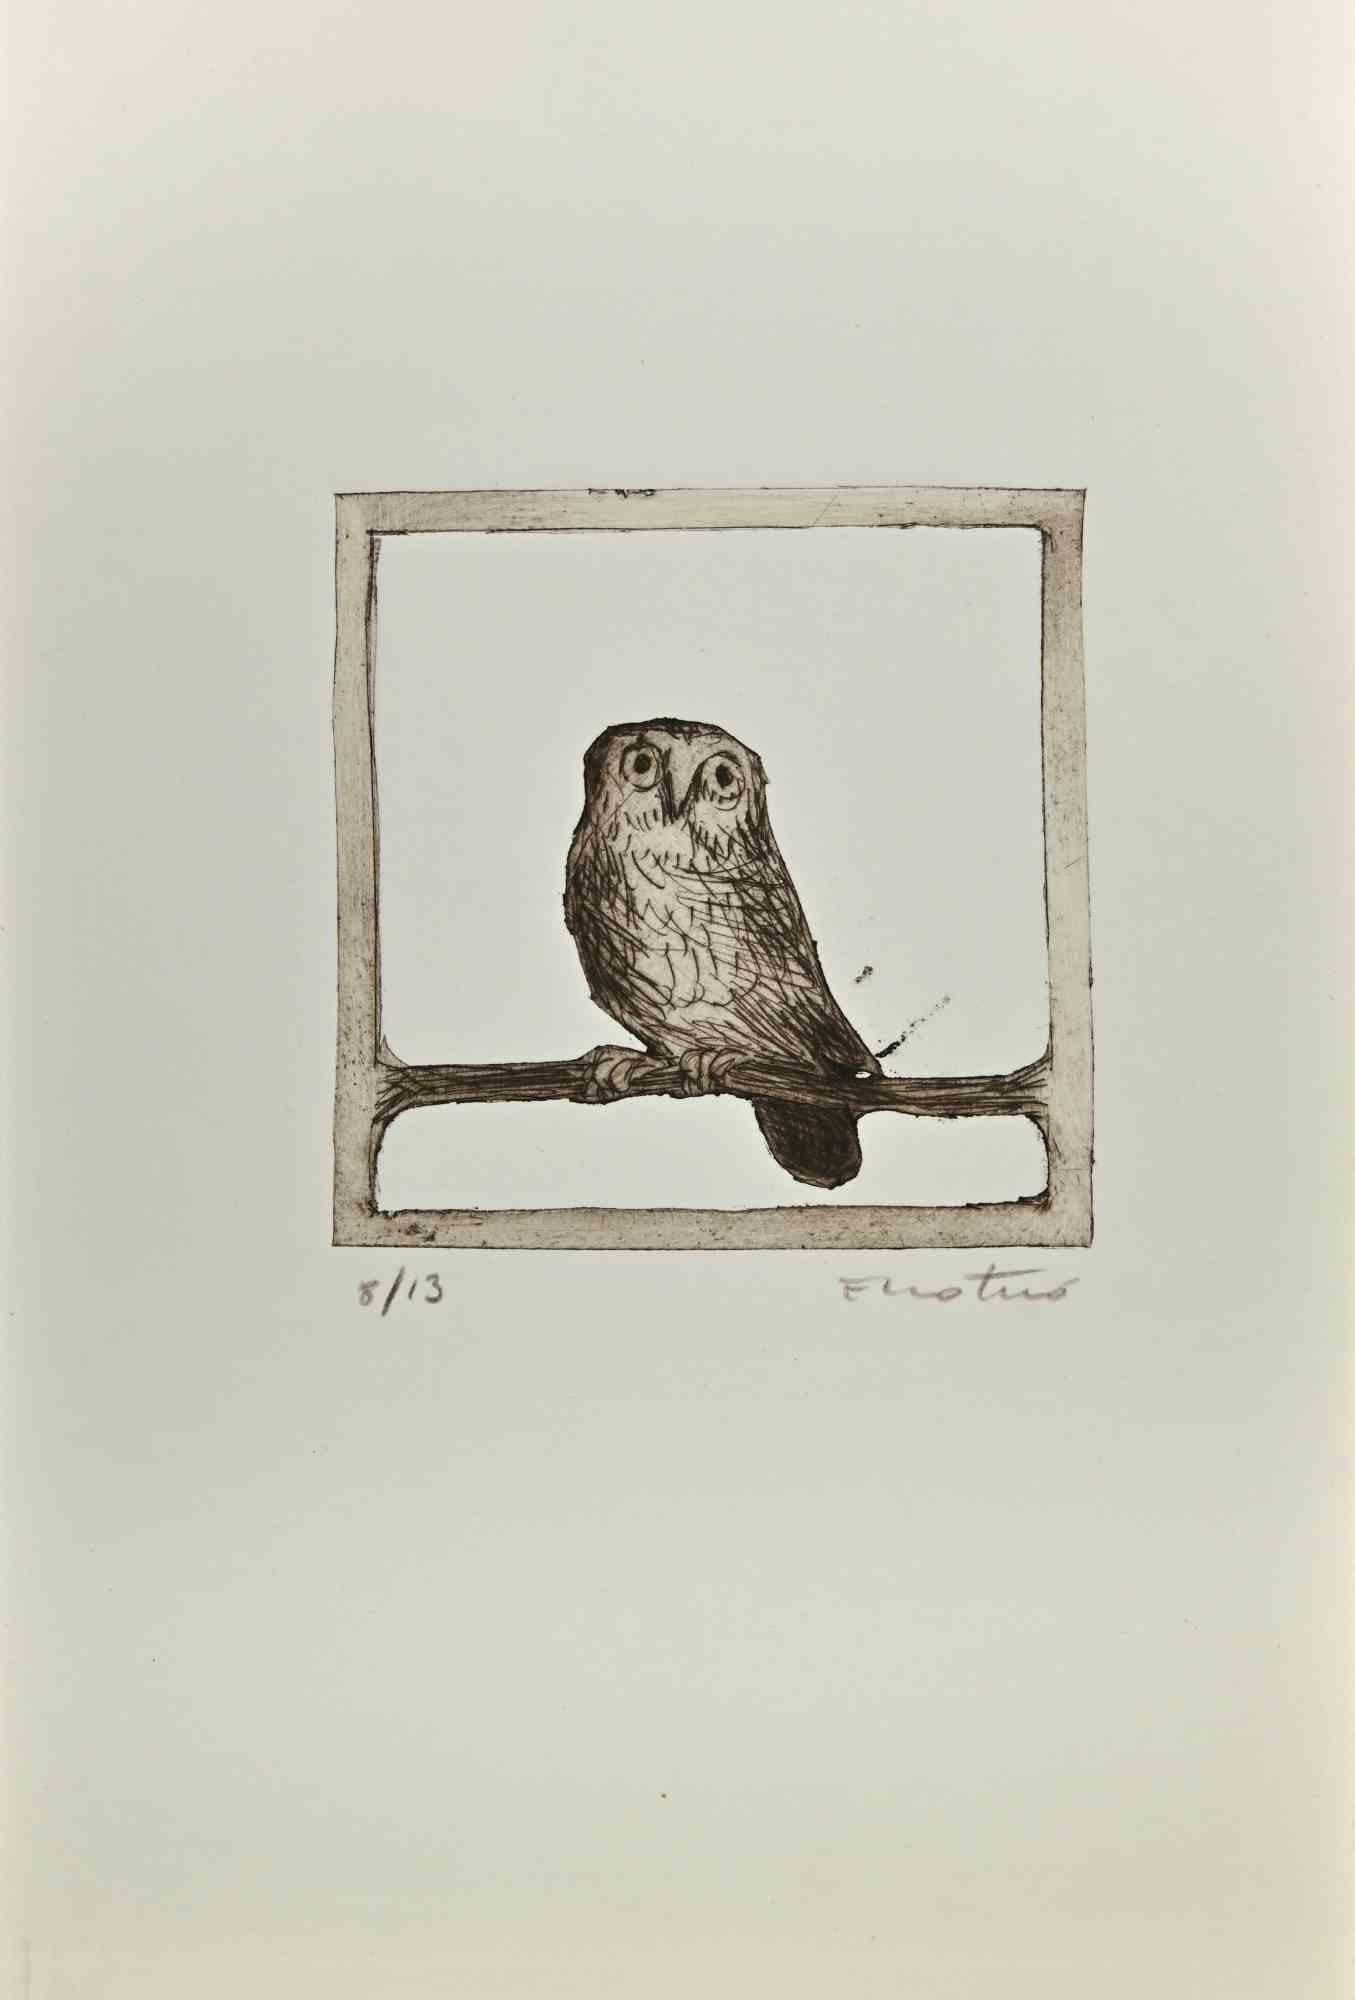 Owl  - Etching by Enotrio Pugliese - 1963